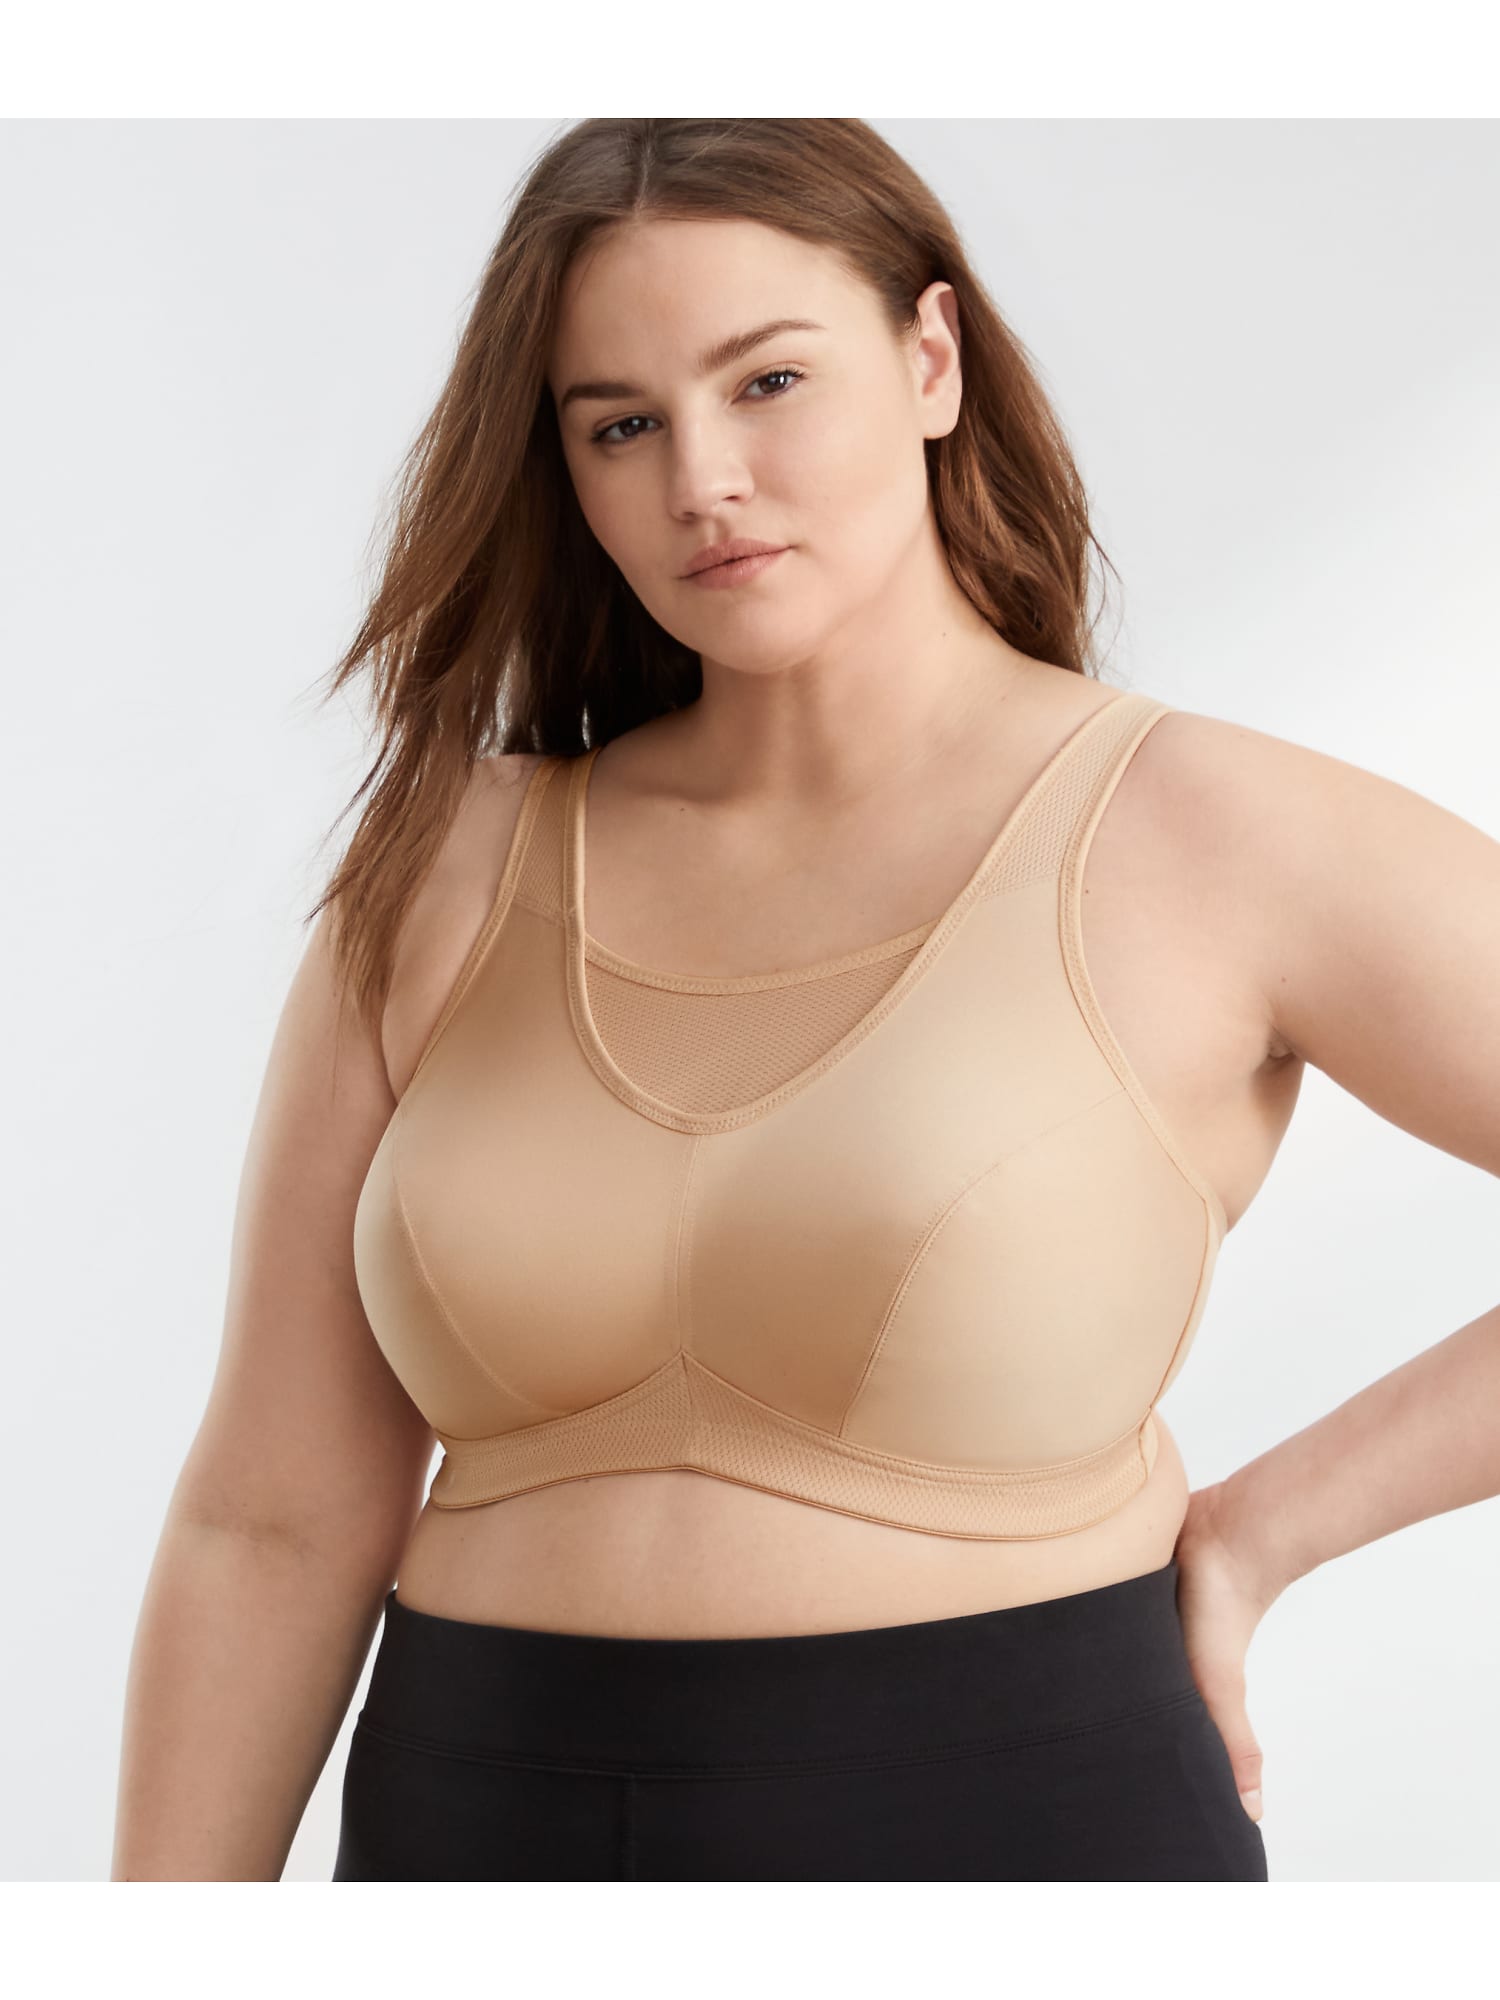 Best Deal for Women's Full Figure No Bounce Plus Size Camisole